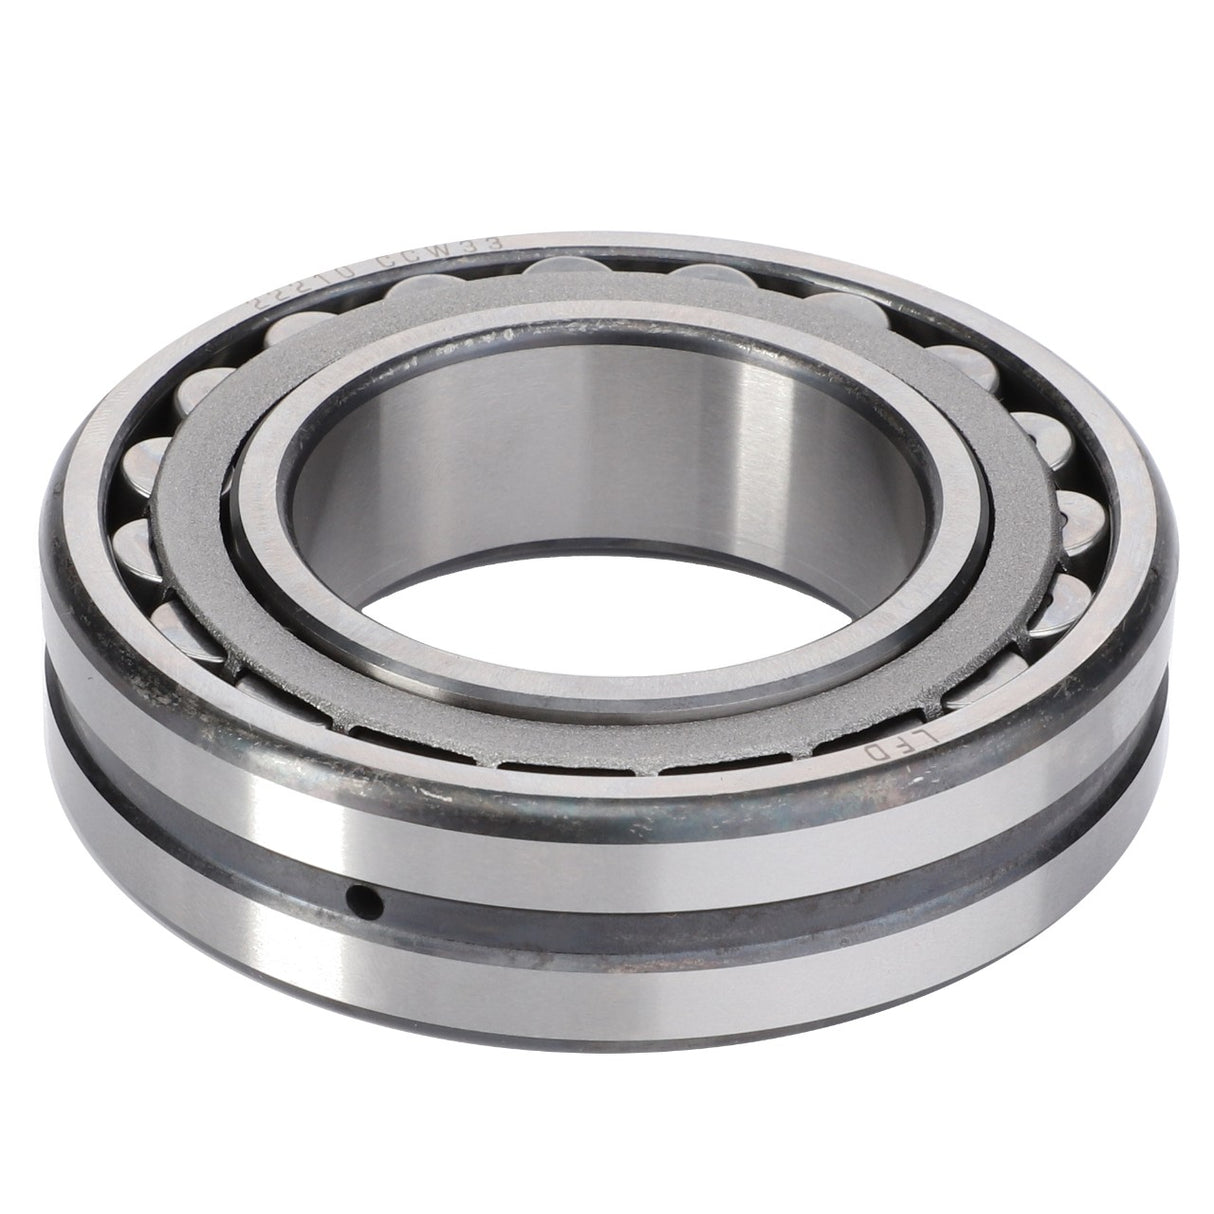 AGCO | Spherical Roller Bearing - 0922-40-10-00 - Farming Parts